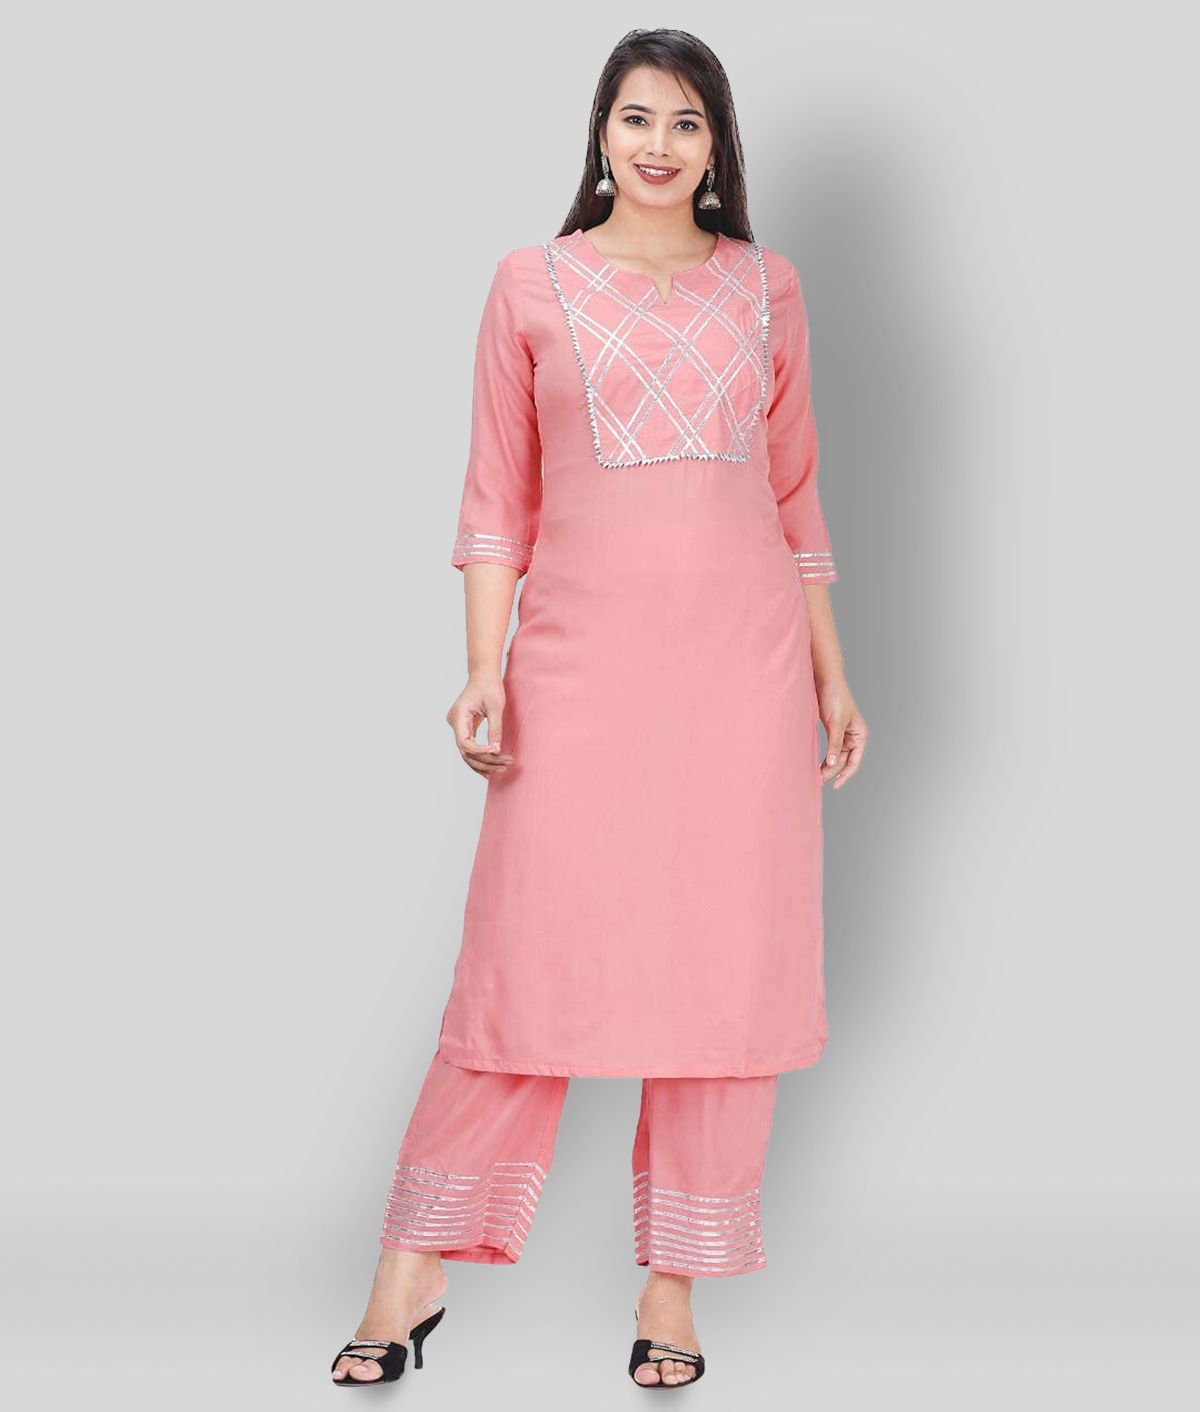     			G4Girl - Pink Straight Rayon Women's Stitched Salwar Suit ( Pack of 1 )